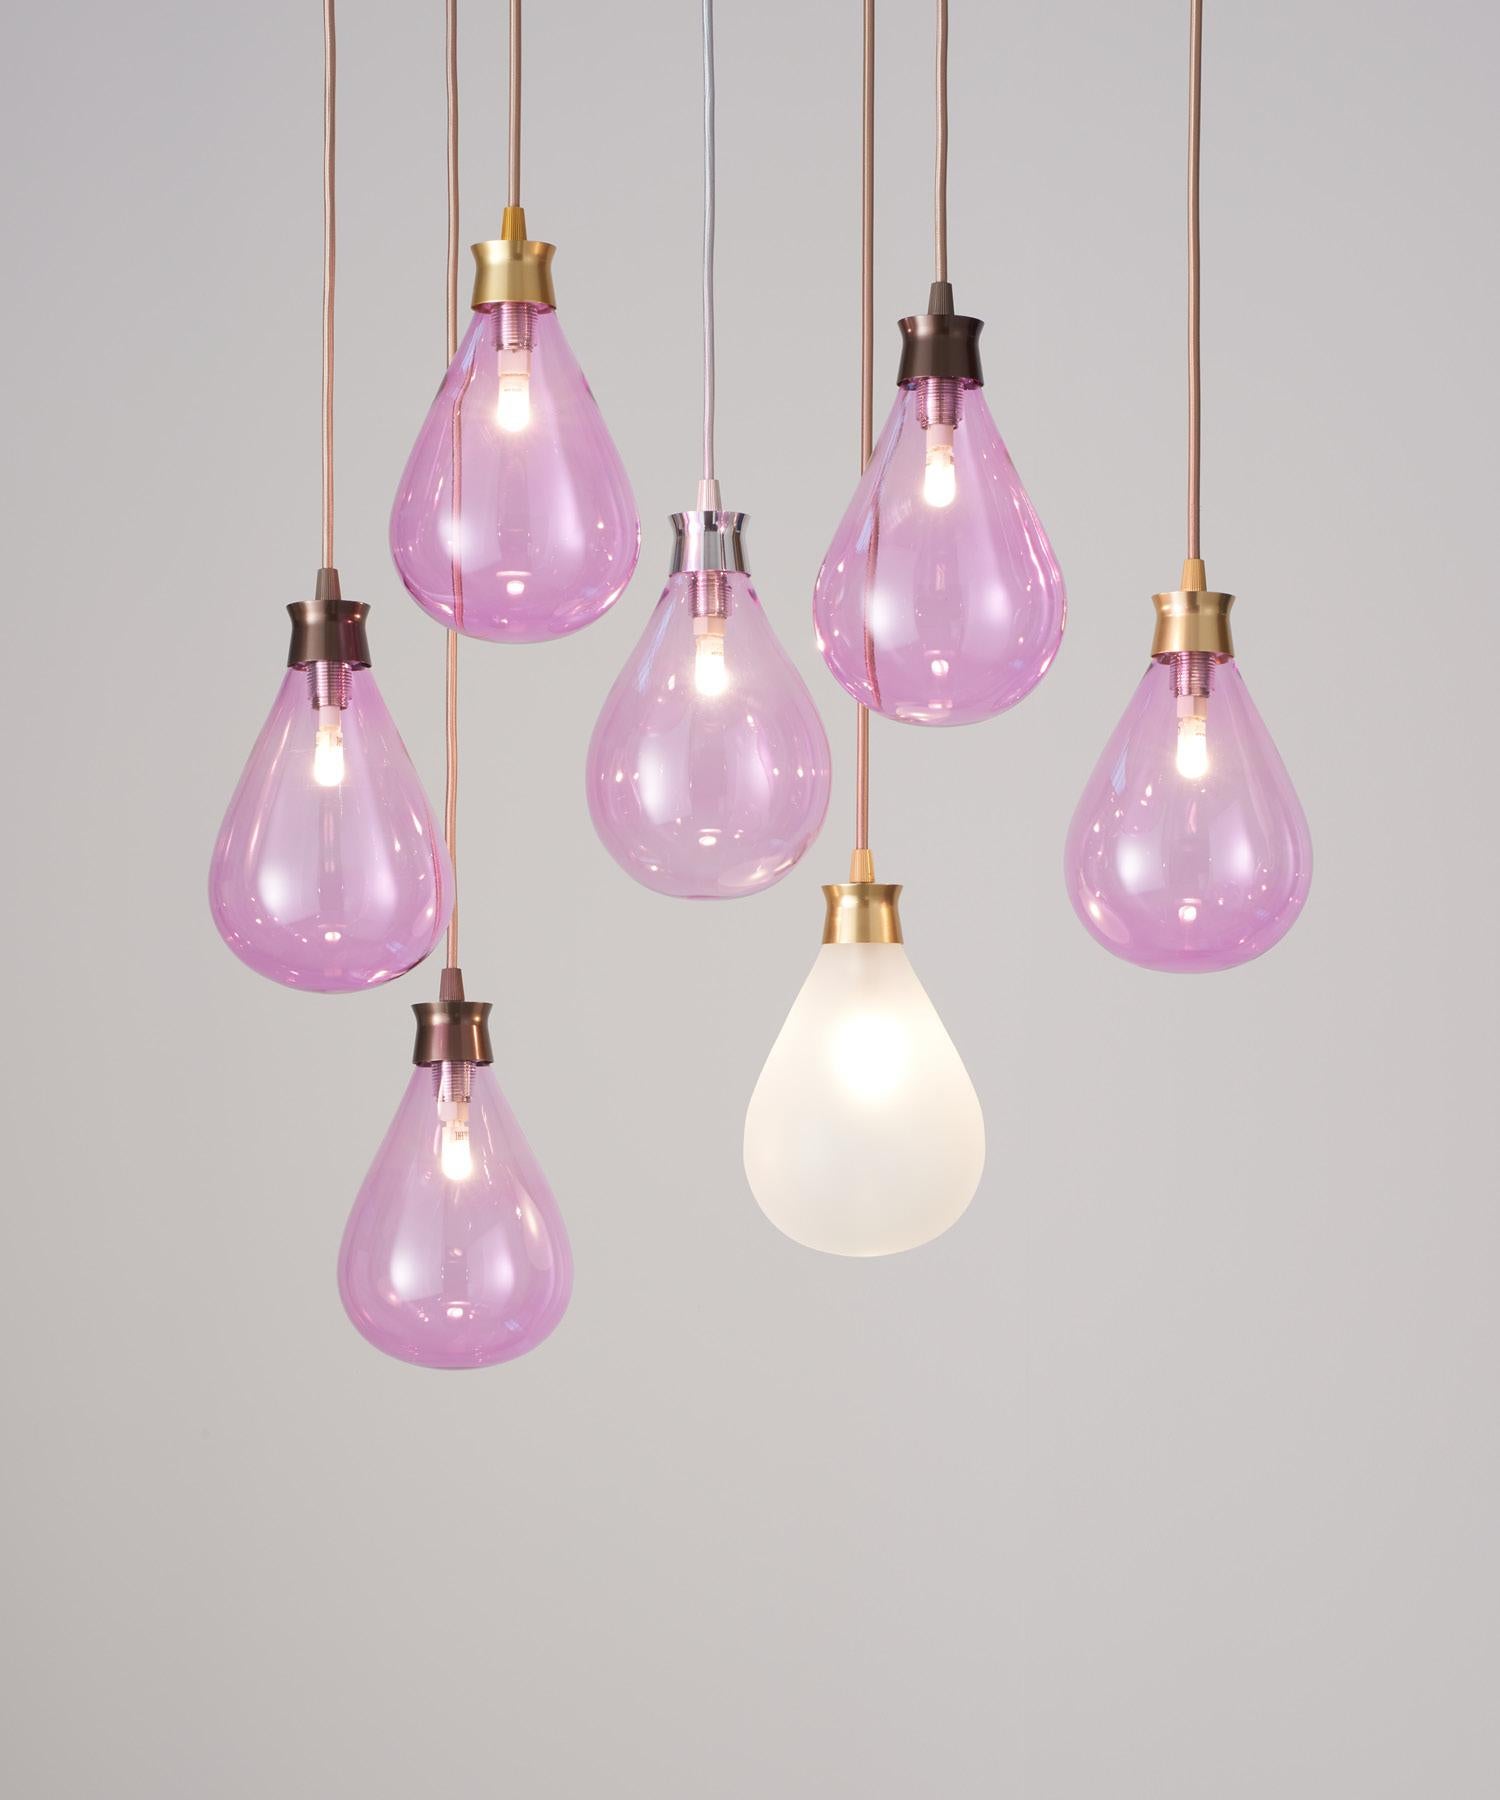 Contemporary Cintola Pendant in Polished Aluminium with Frosted Handblown Glass Globe For Sale